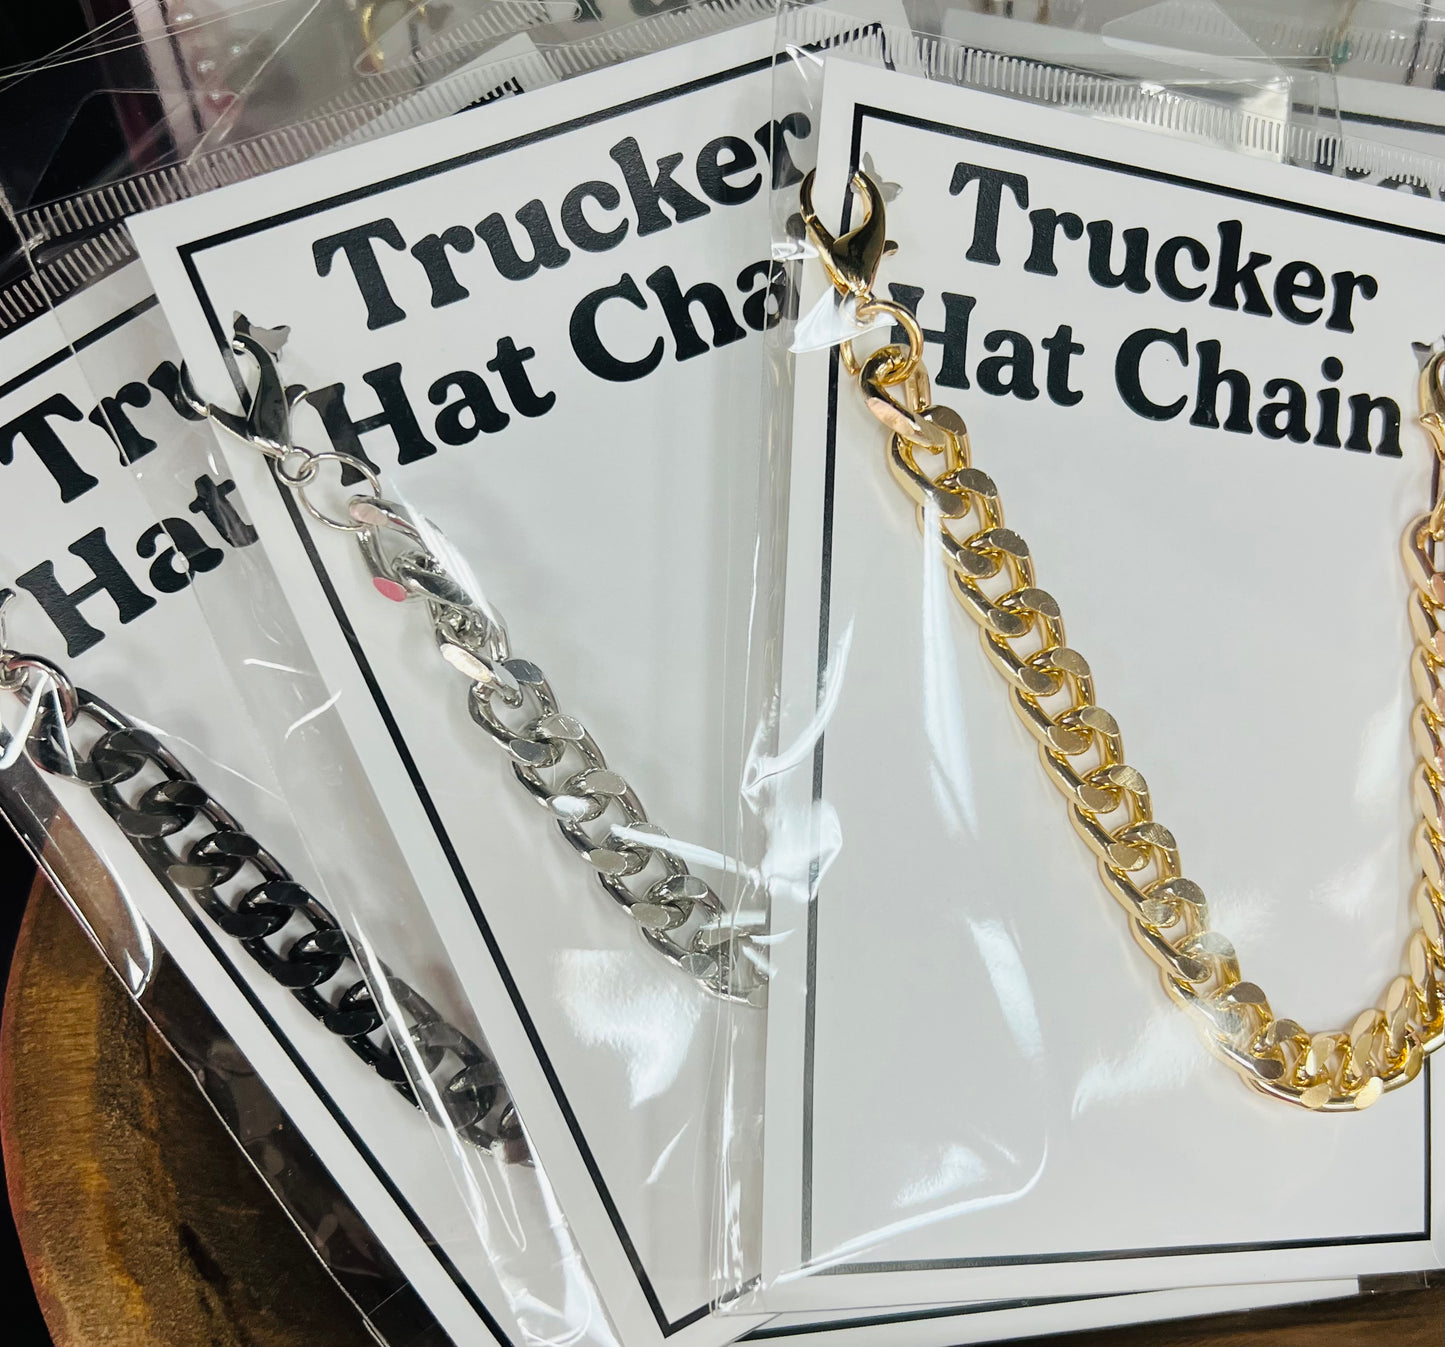 Chunky Trucker Hat Chains